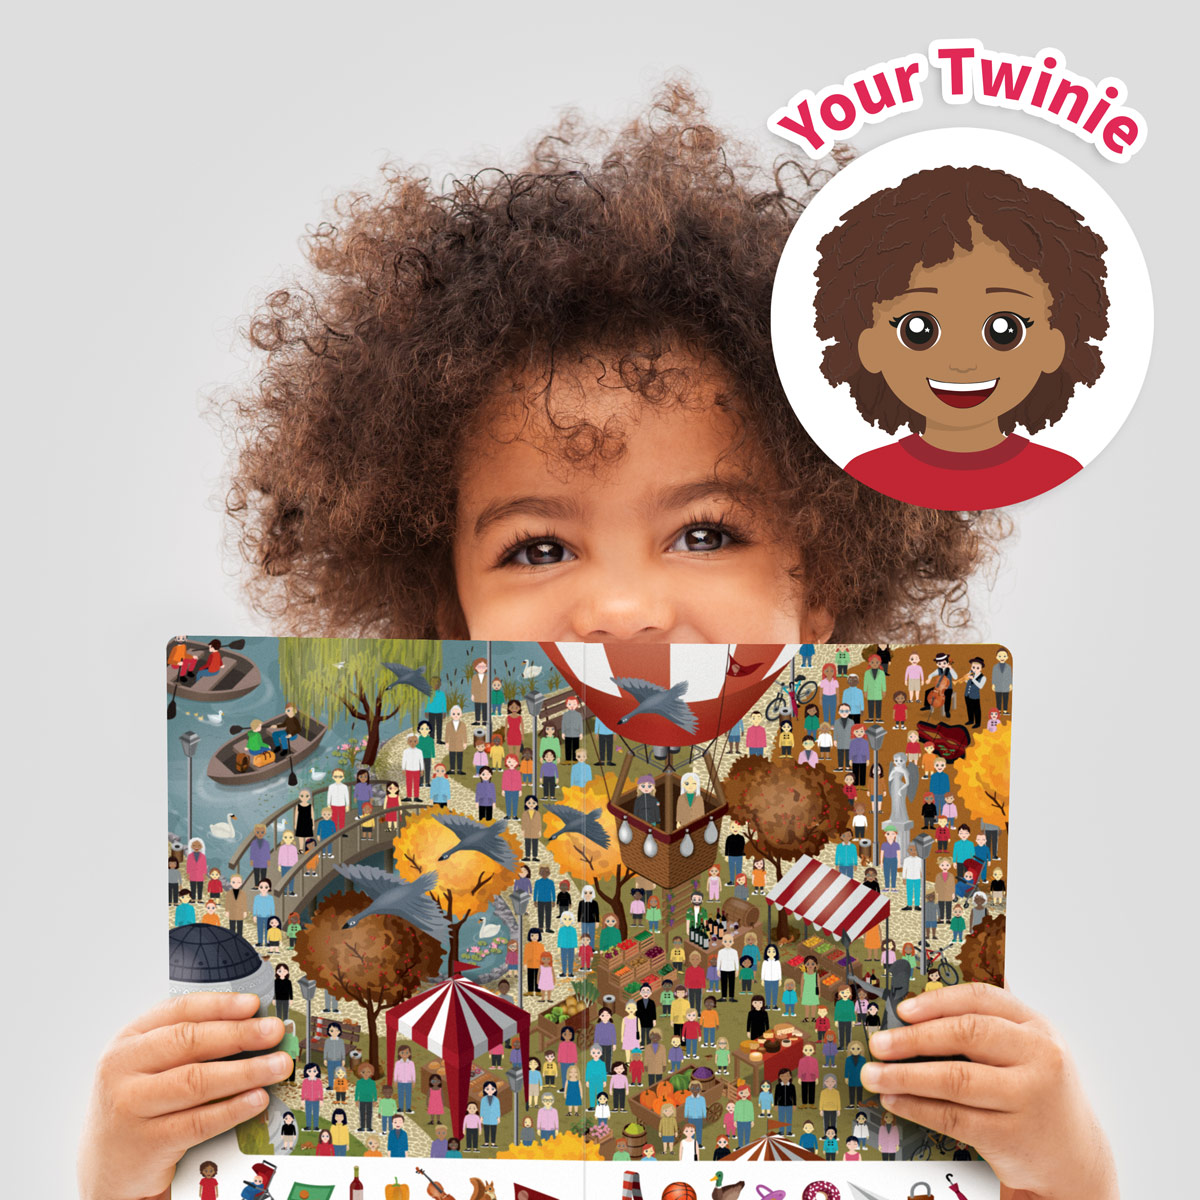 Where is My Twinie? Personalized Book by Stikets